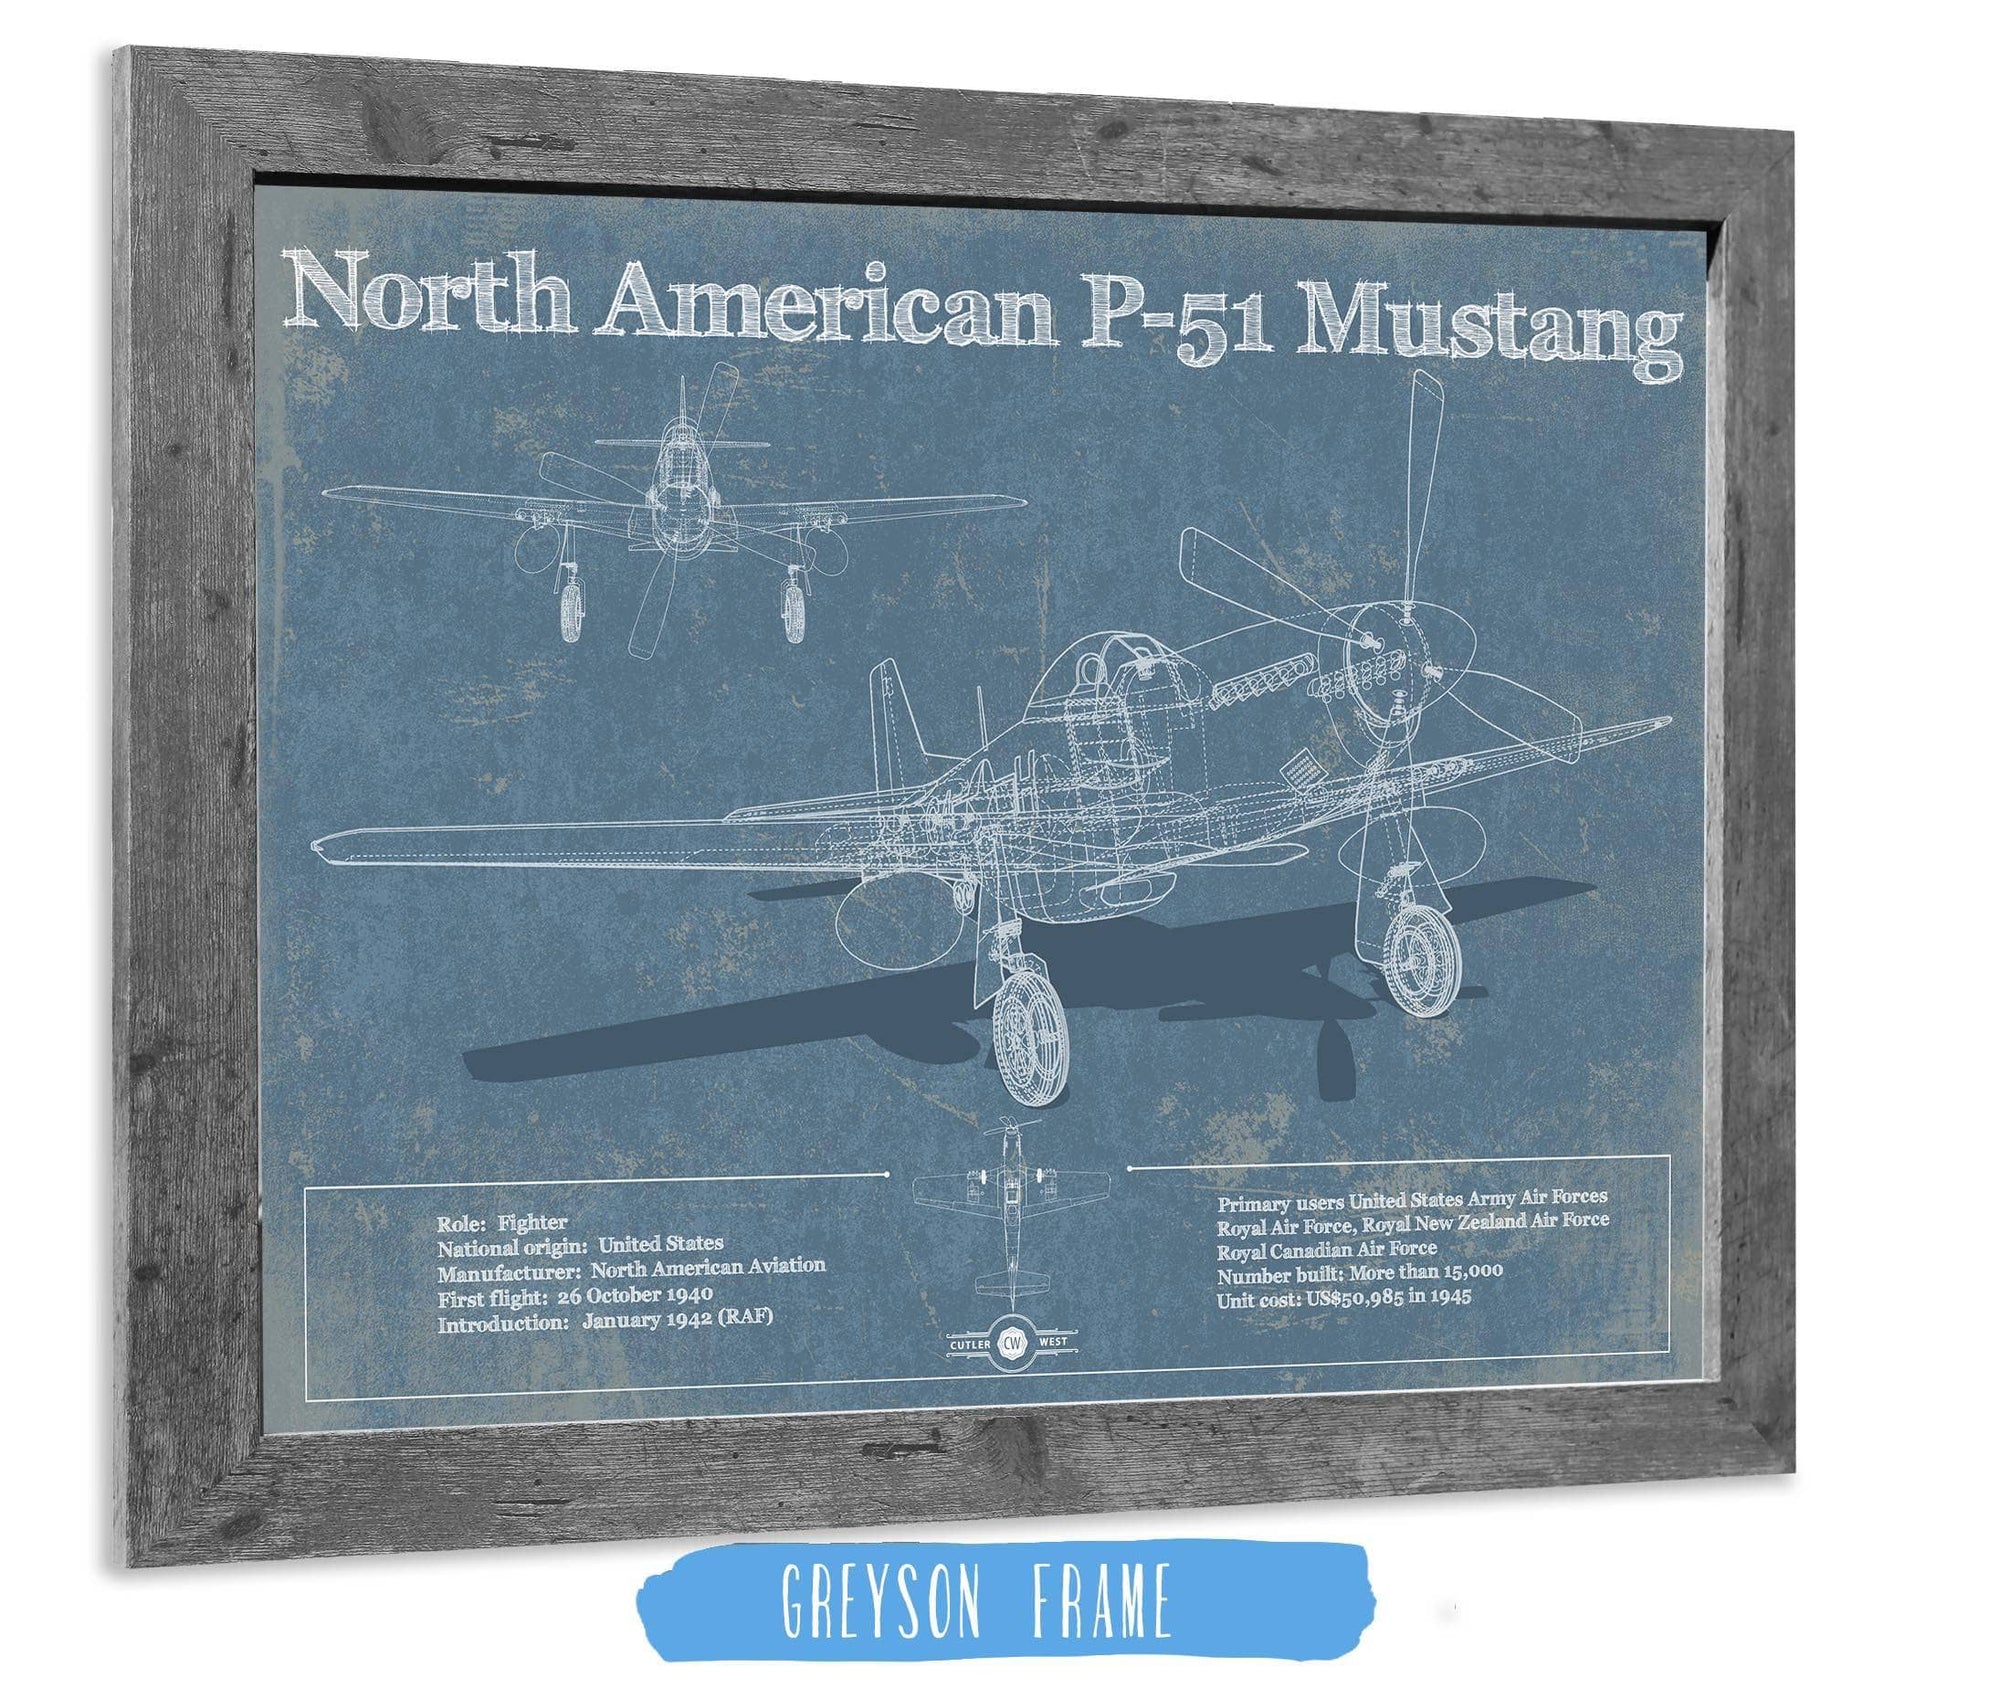 Cutler West Best Selling Collection 14" x 11" / Greyson Frame P-51 Mustang Fighter Plane Aircraft Blueprint Original Military Wall Art 803745759-TOP